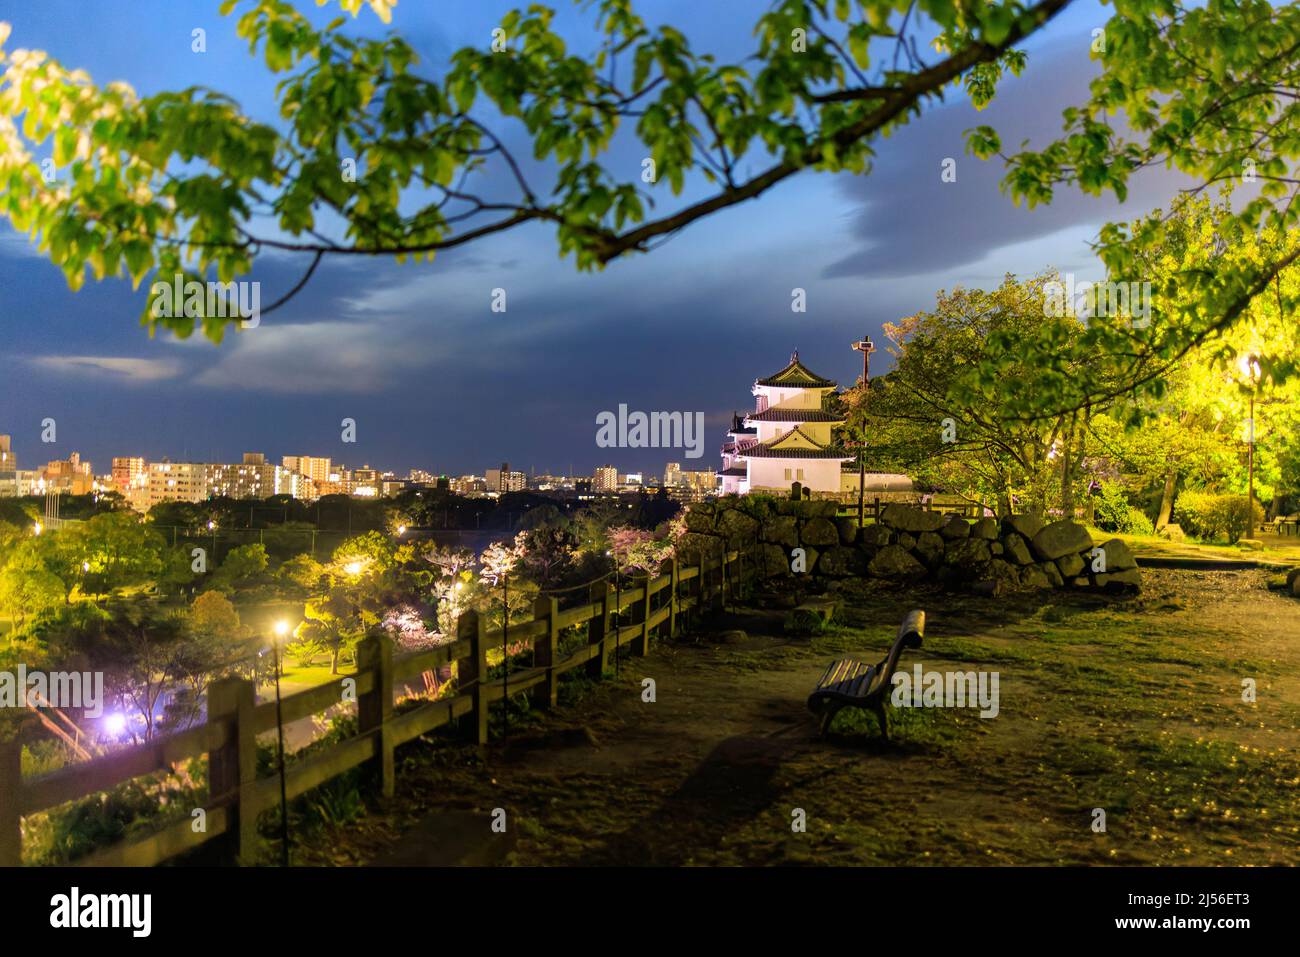 Bench at viewpoint overlooking historic Japanese castle and downtown Akashi  Stock Photo